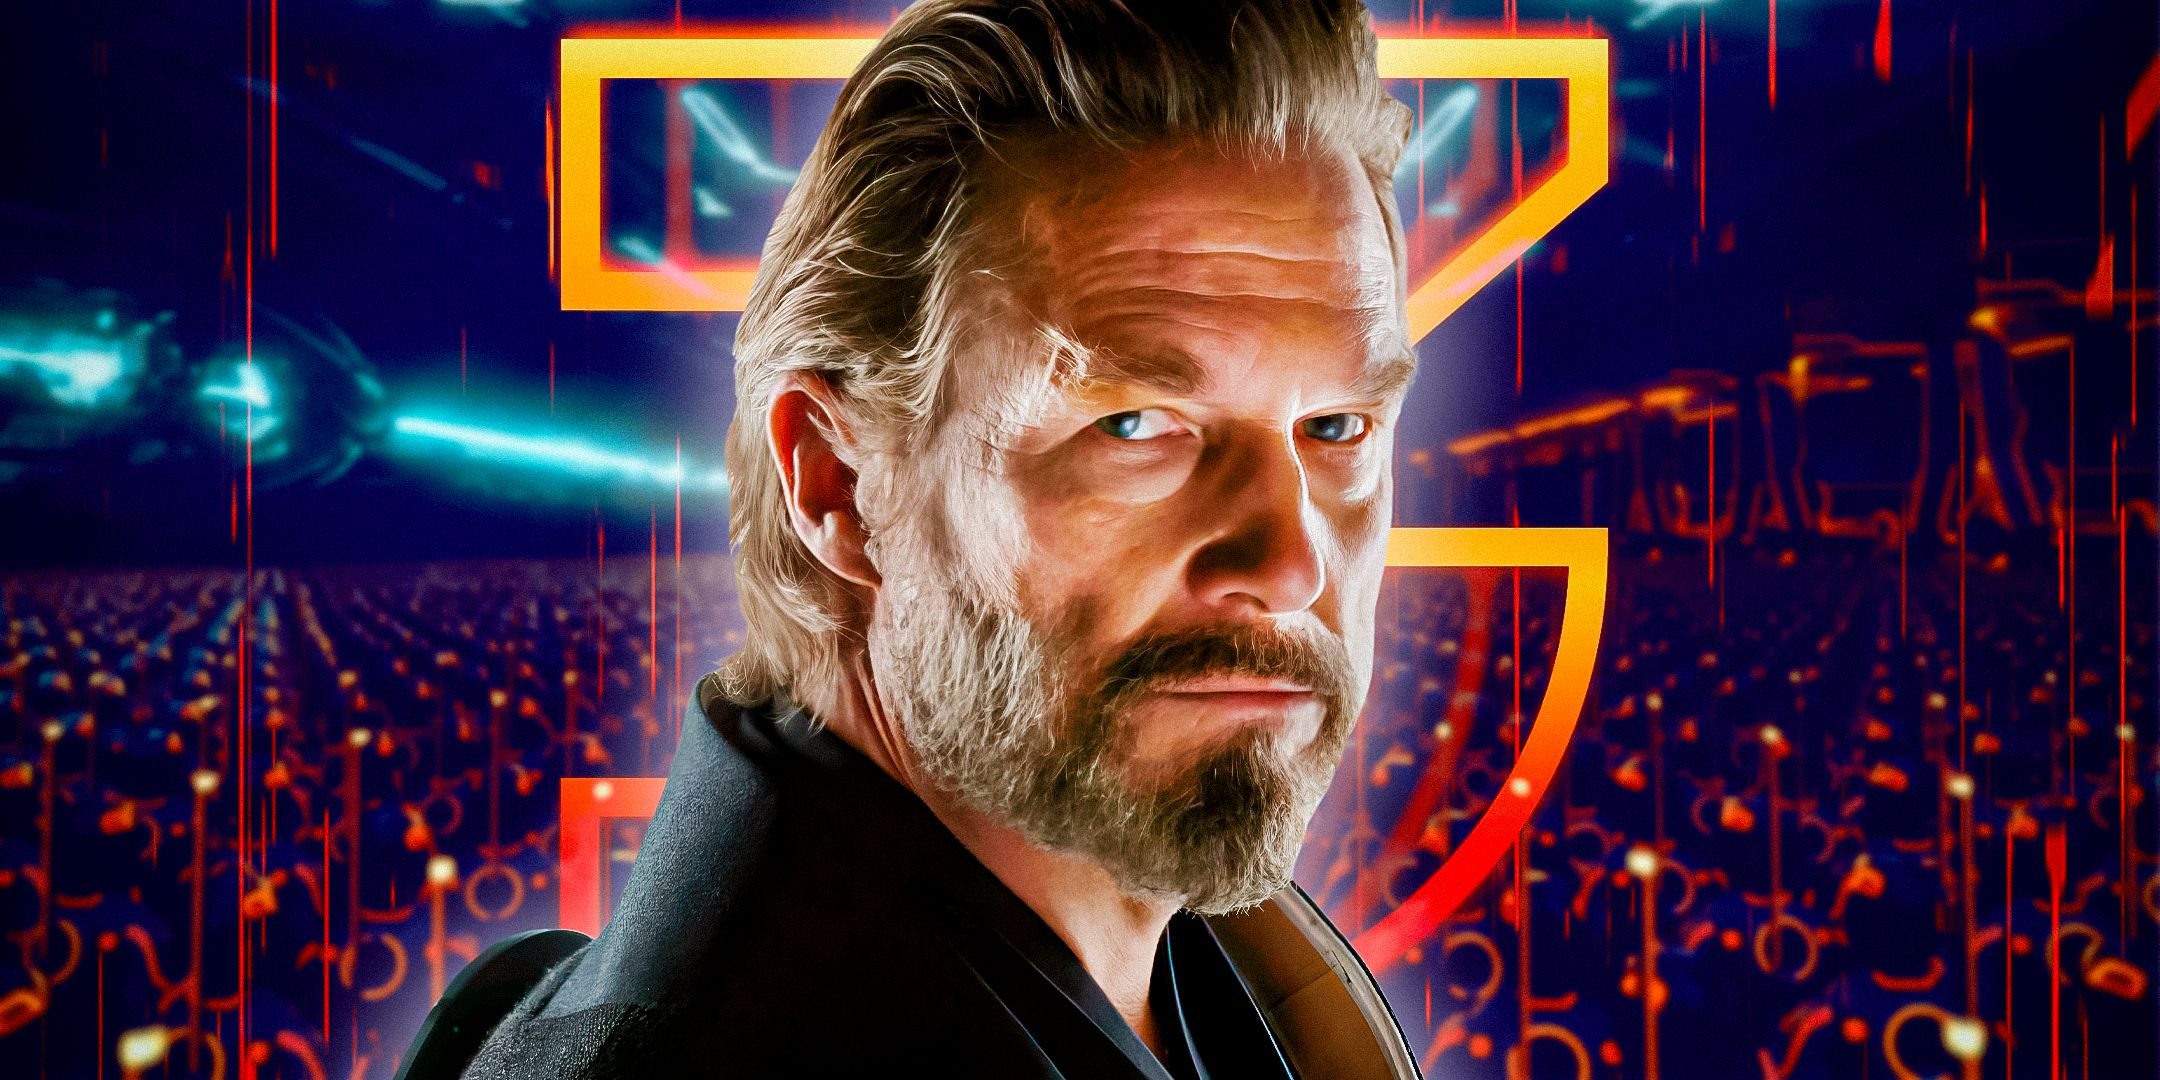 Jeff Bridges Tron 3 Update Is A Much Bigger Deal Than I Thought